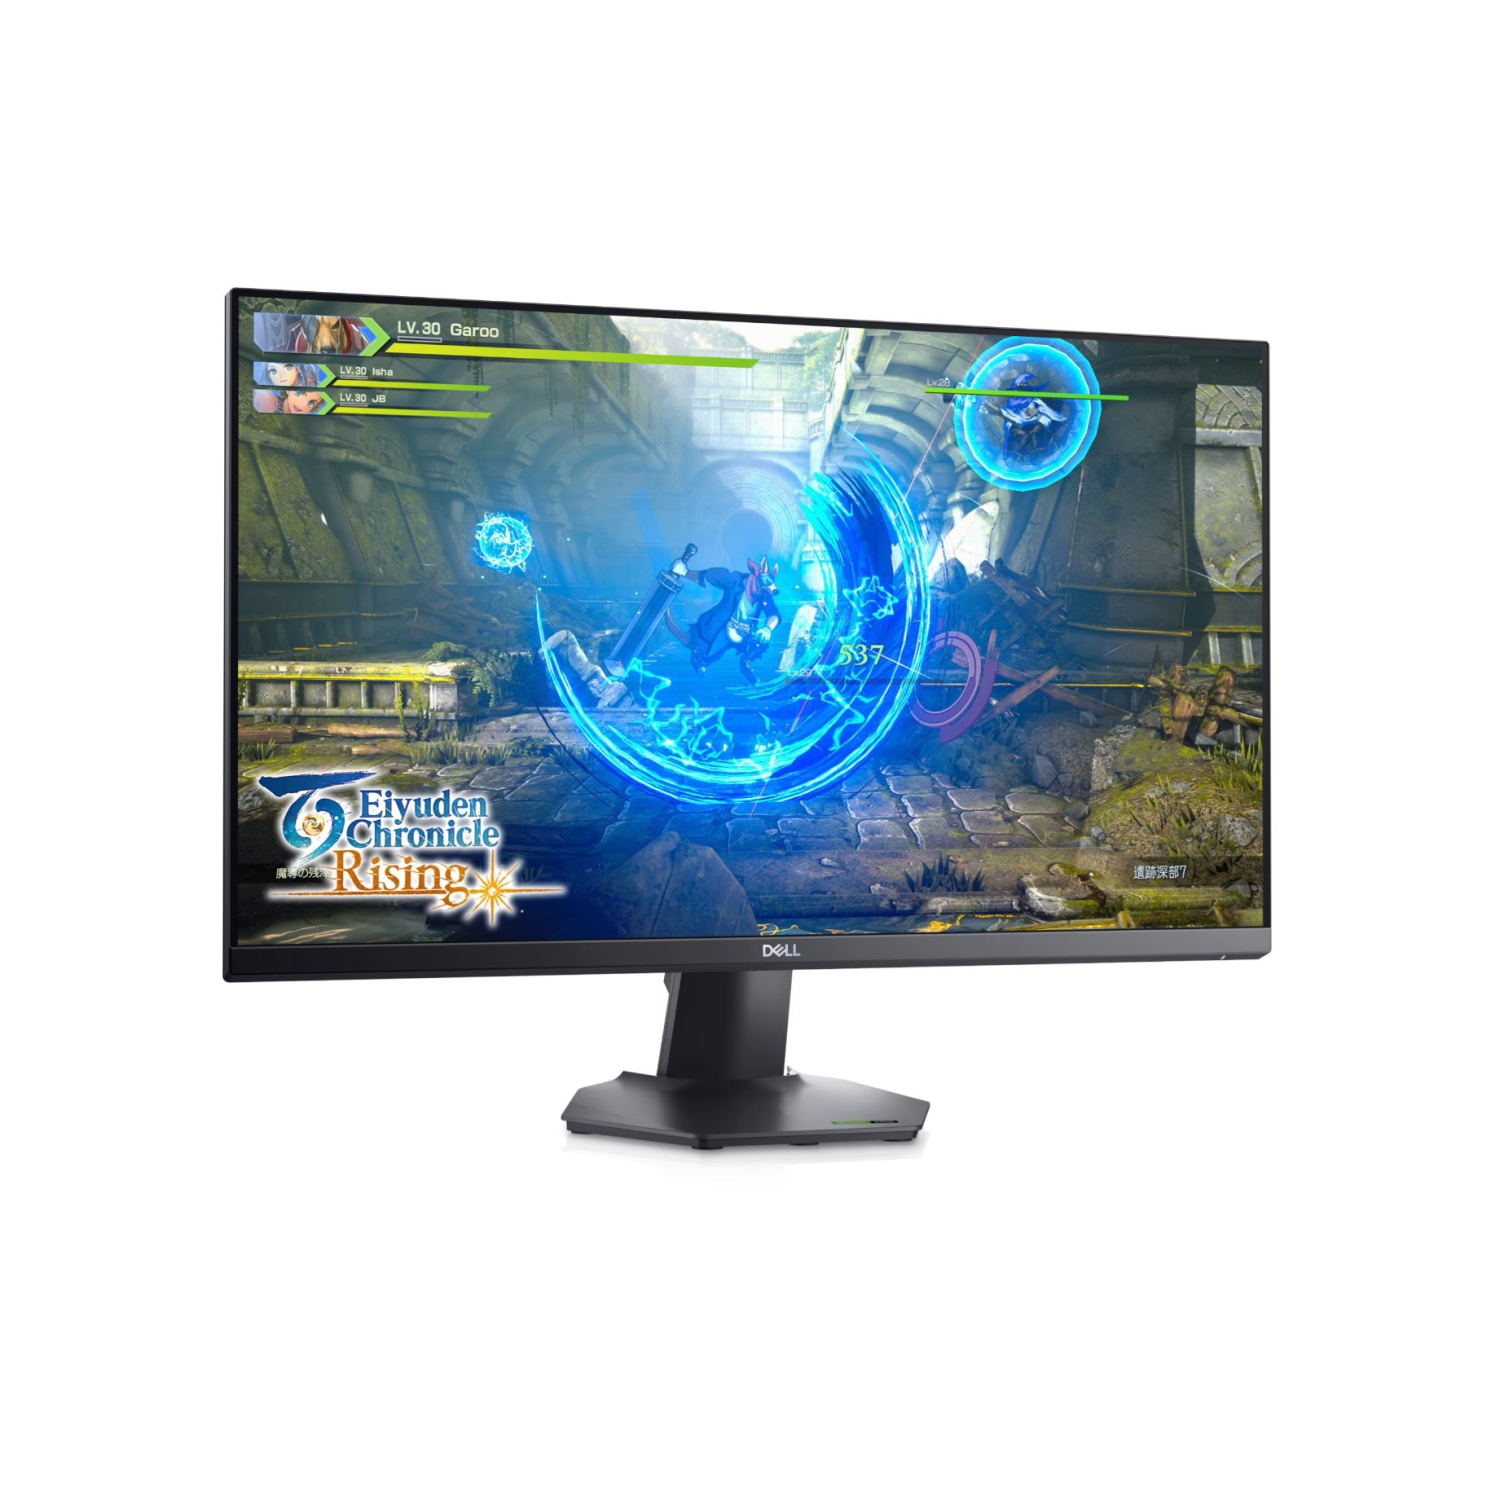 Dell G2723HN (Gaming) Monitor 27" FHD 1920X1080 165Hz, Nvidia G Sync C., AMD FreeSyncPT, 2xHDMI, DP Certified Refurbished